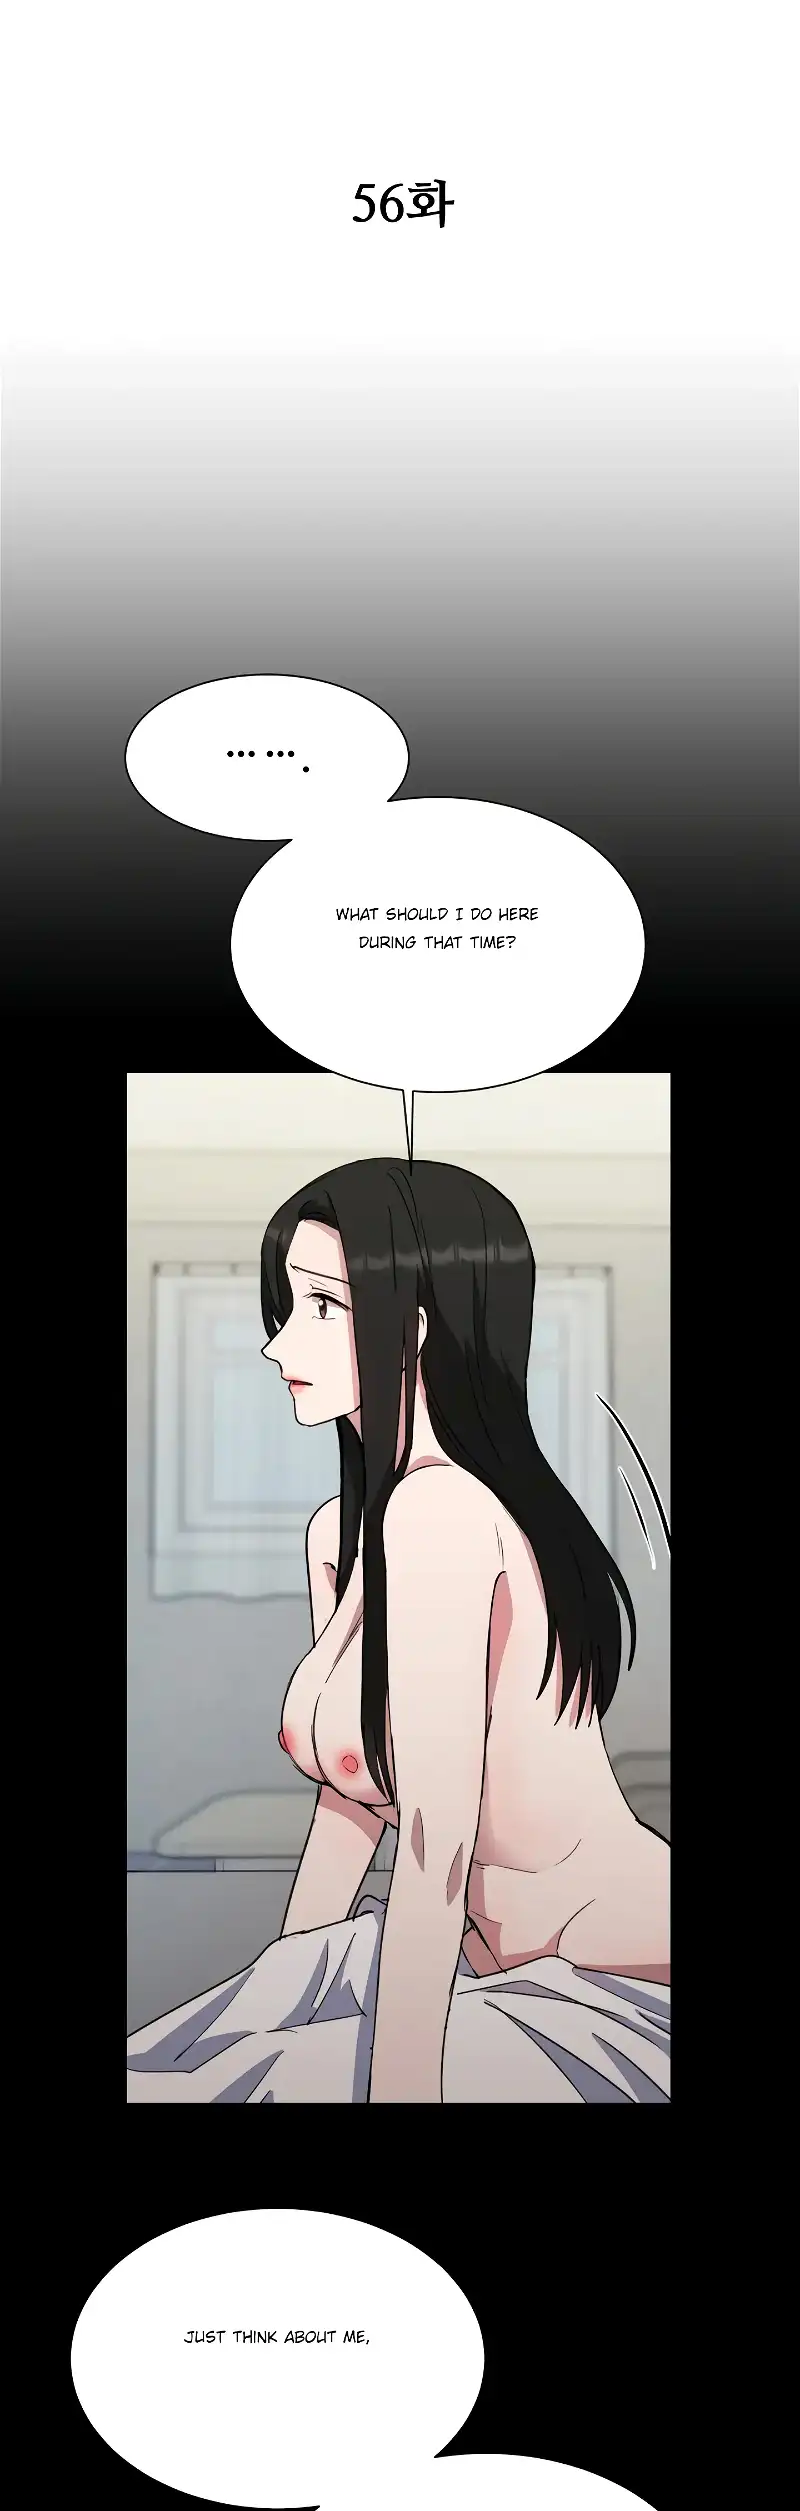 Absolute Possession Chapter 56 - R18 - page 9